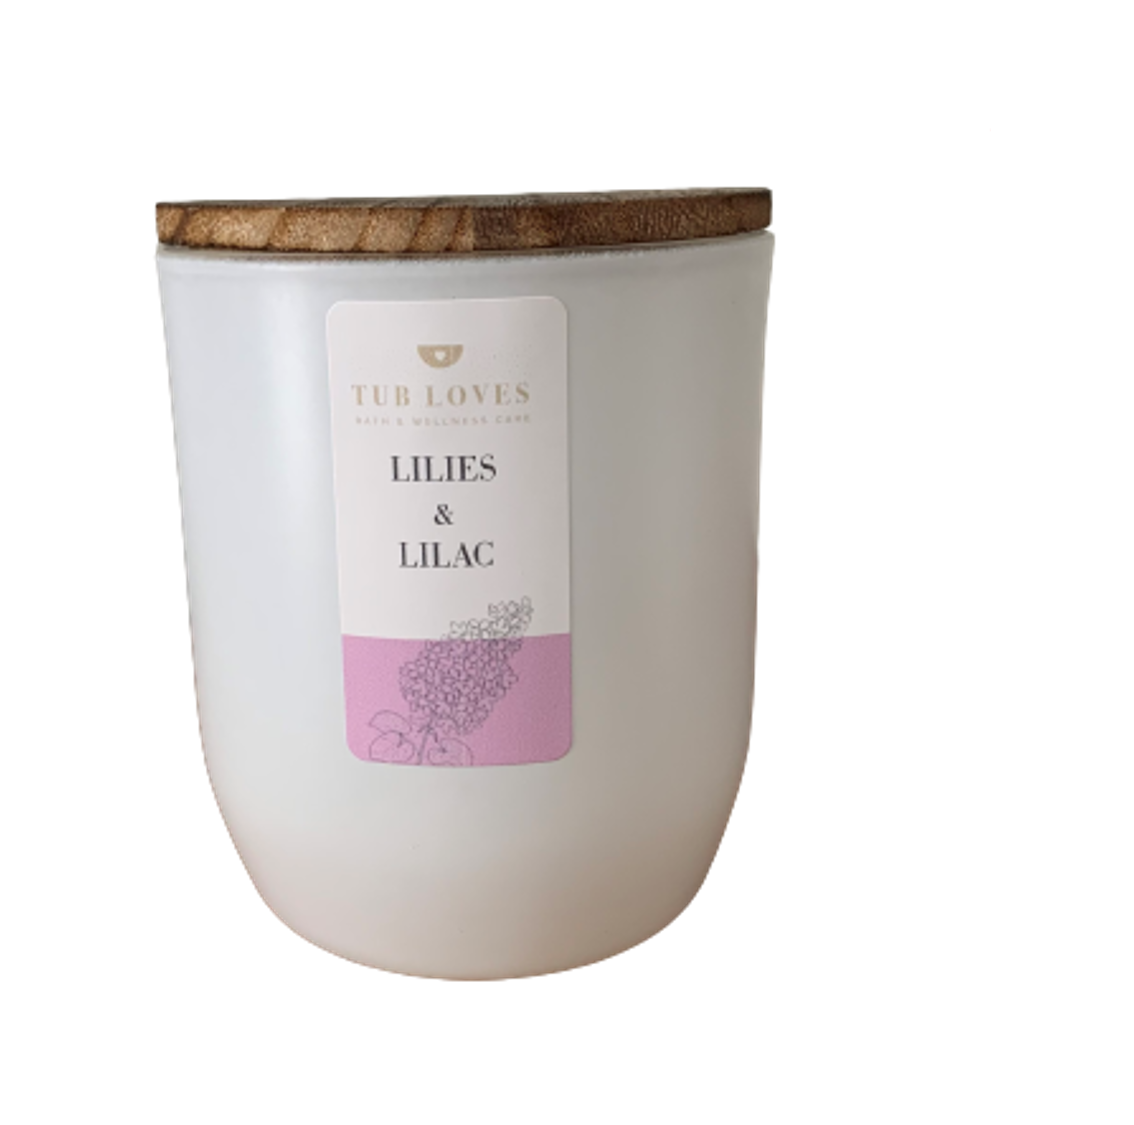 Lilies & Lilac Soy Candle